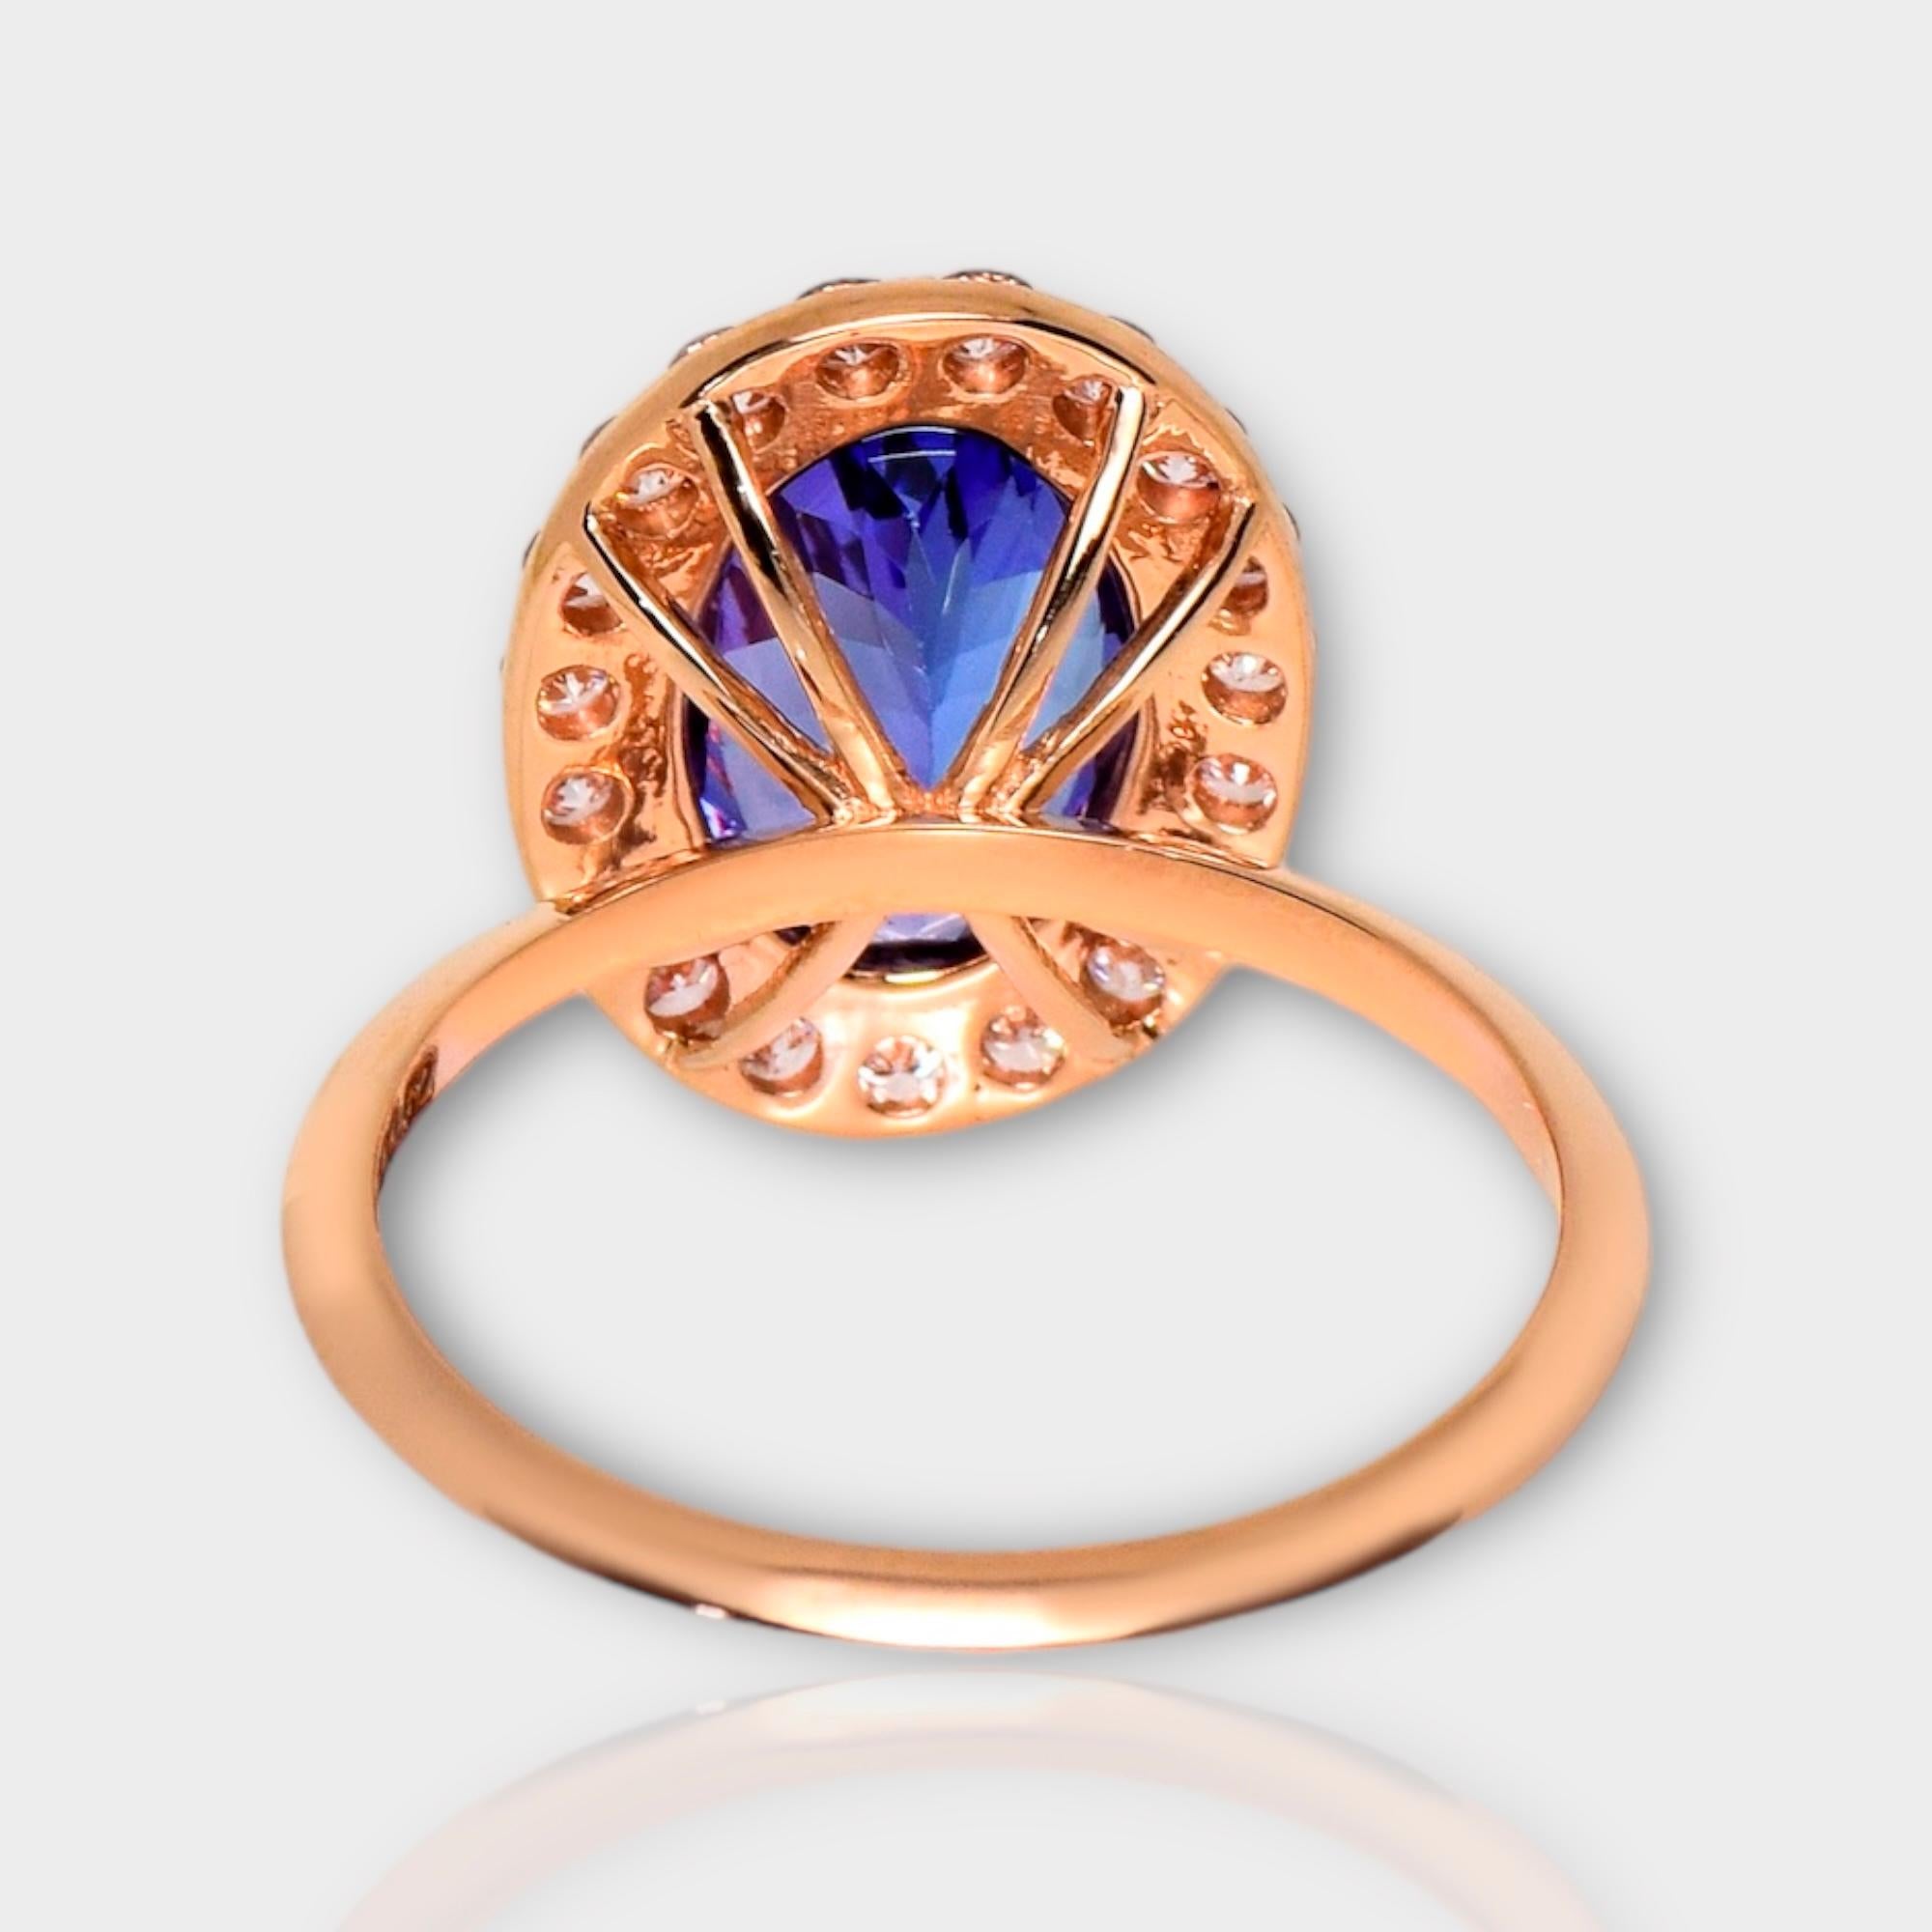 IGI 14K 2.15 ct Tanzanite&Pink Diamond Antique Art Deco Engagement Ring In New Condition For Sale In Kaohsiung City, TW